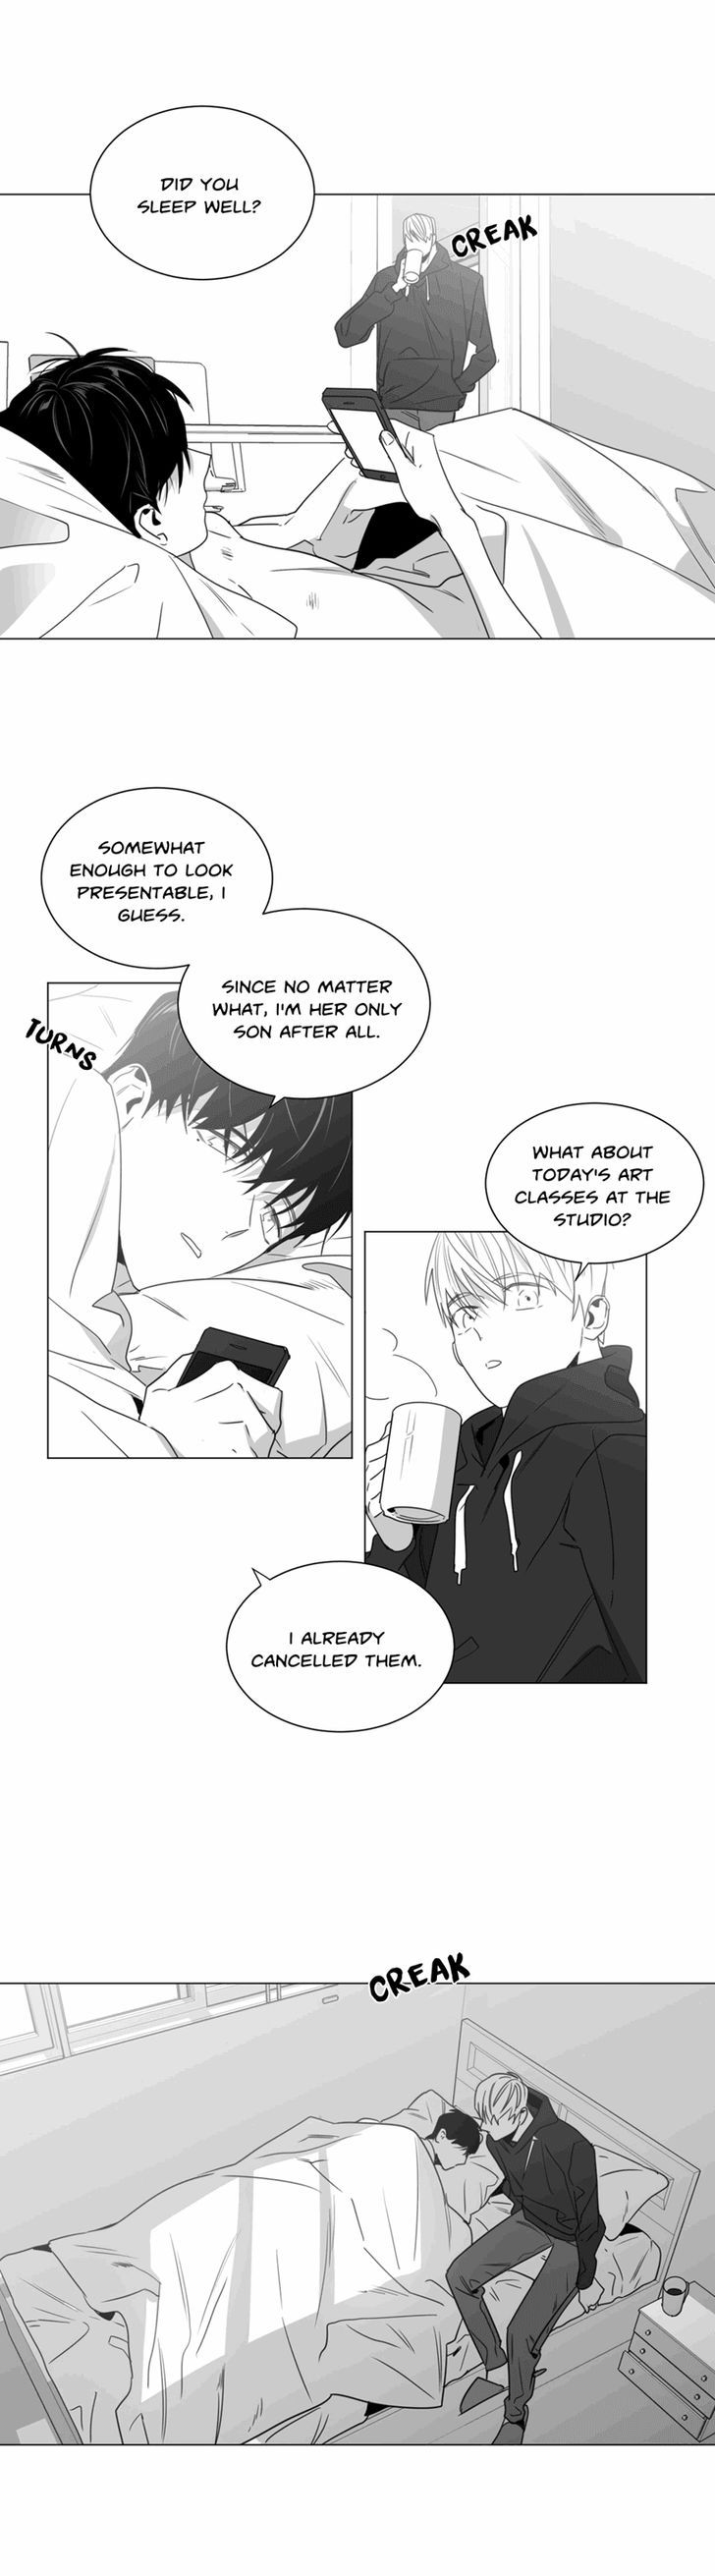 Lover Boy (Lezhin) Chapter 031 page 6